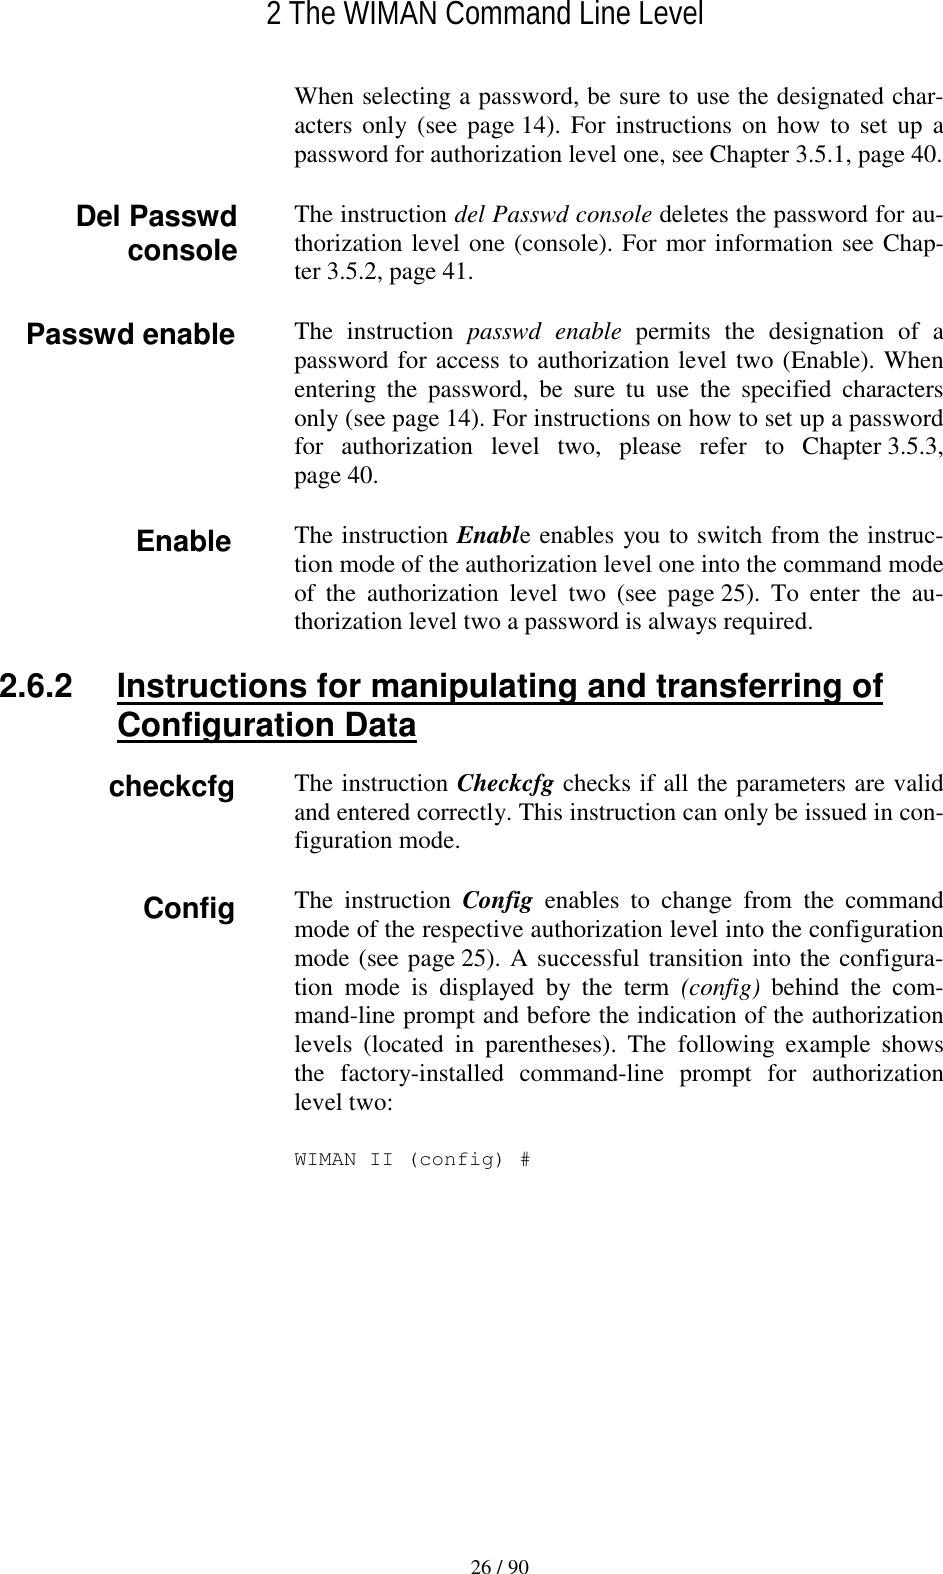   2 The WIMAN Command Line Level 26 / 90 When selecting a password, be sure to use the designated char-acters only (see page 14). For instructions on how to set up a password for authorization level one, see Chapter 3.5.1, page 40. The instruction del Passwd console deletes the password for au-thorization level one (console). For mor information see Chap-ter 3.5.2, page 41. The instruction passwd enable permits the designation of a password for access to authorization level two (Enable). When entering the password, be sure tu use the specified characters only (see page 14). For instructions on how to set up a password for authorization level two, please refer to Chapter 3.5.3, page 40. The instruction Enable enables you to switch from the instruc-tion mode of the authorization level one into the command mode of the authorization level two (see page 25). To enter the au-thorization level two a password is always required. 2.6.2  Instructions for manipulating and transferring of Configuration Data The instruction Checkcfg checks if all the parameters are valid and entered correctly. This instruction can only be issued in con-figuration mode. The instruction Config  enables to change from the command mode of the respective authorization level into the configuration mode (see page 25). A successful transition into the configura-tion mode is displayed by the term (config) behind the com-mand-line prompt and before the indication of the authorization levels (located in parentheses). The following example shows the factory-installed command-line prompt for authorization level two: WIMAN II (config) # Del Passwd console Enable Config Passwd enable checkcfg 